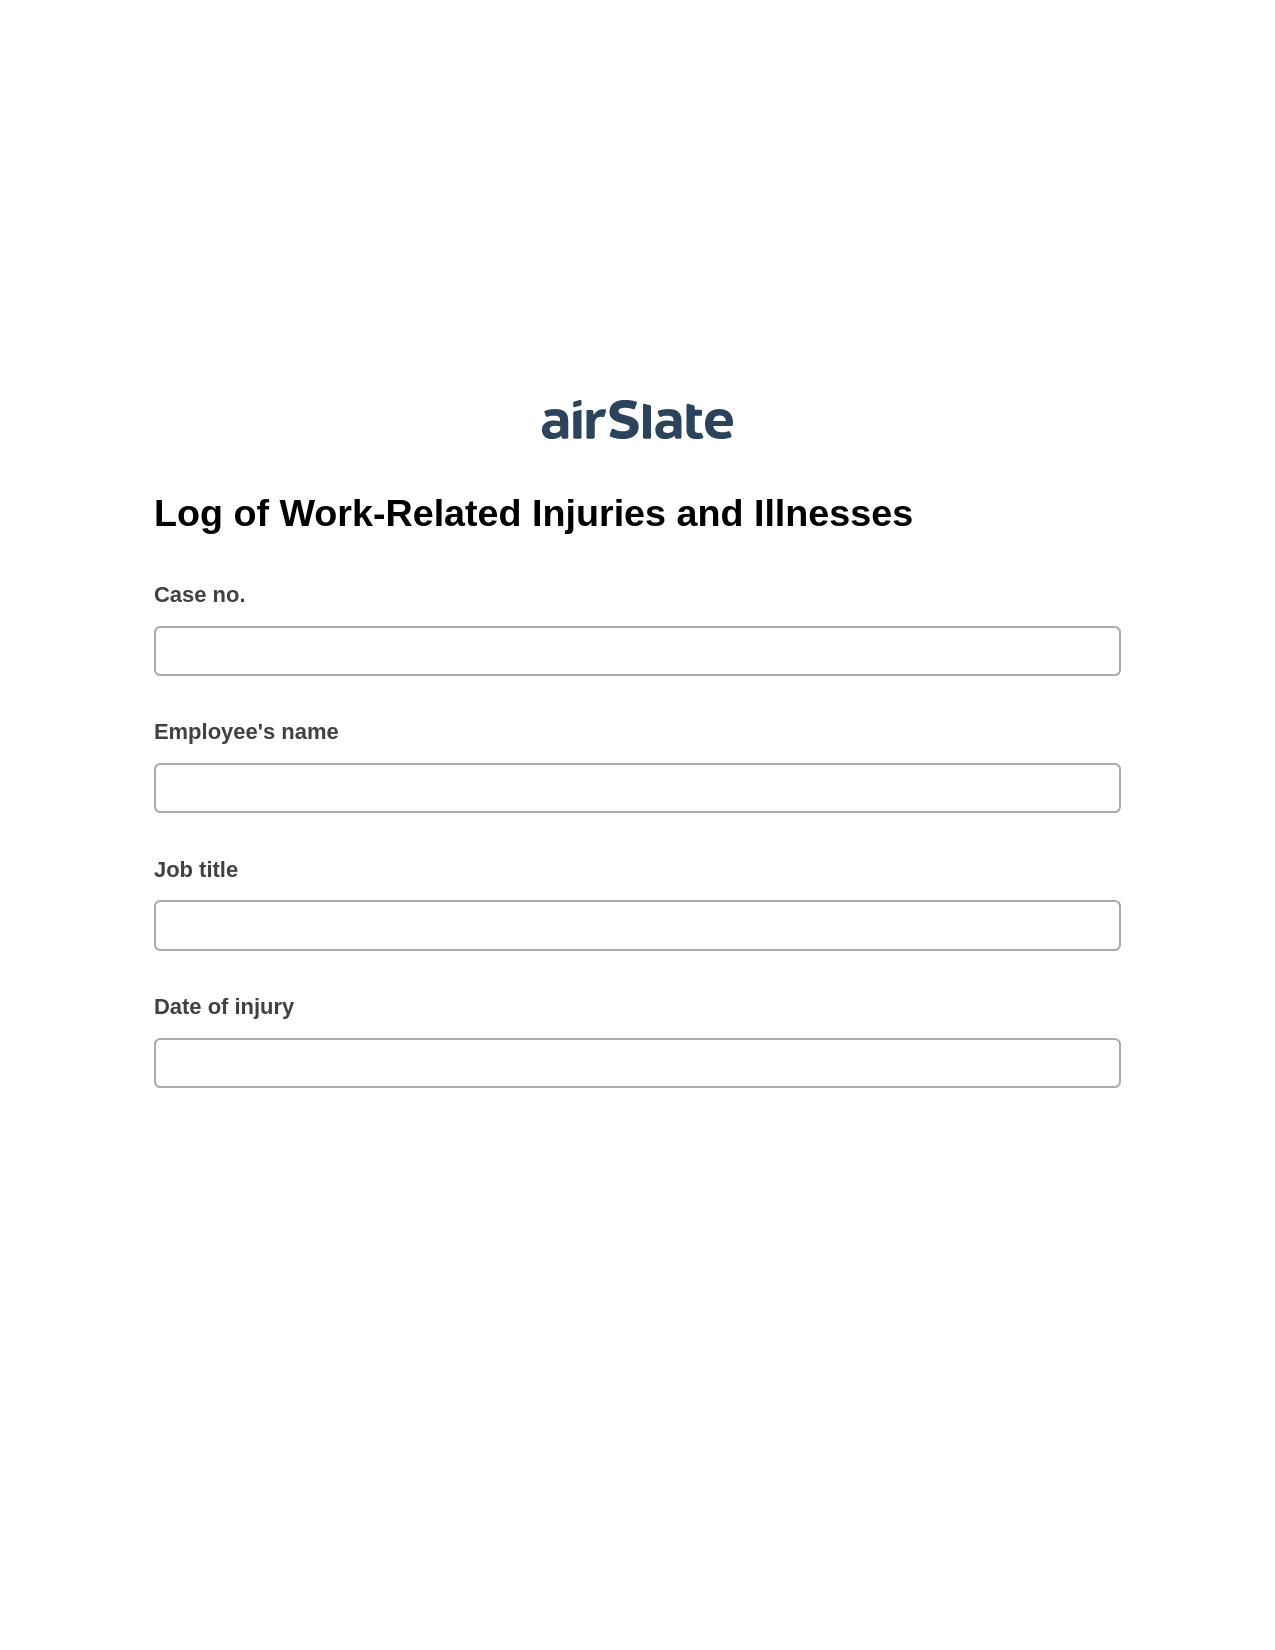 Log of Work-Related Injuries and Illnesses Pre-fill Slate from MS Dynamics 365 Records Bot, Update Salesforce Record Bot, OneDrive Bot